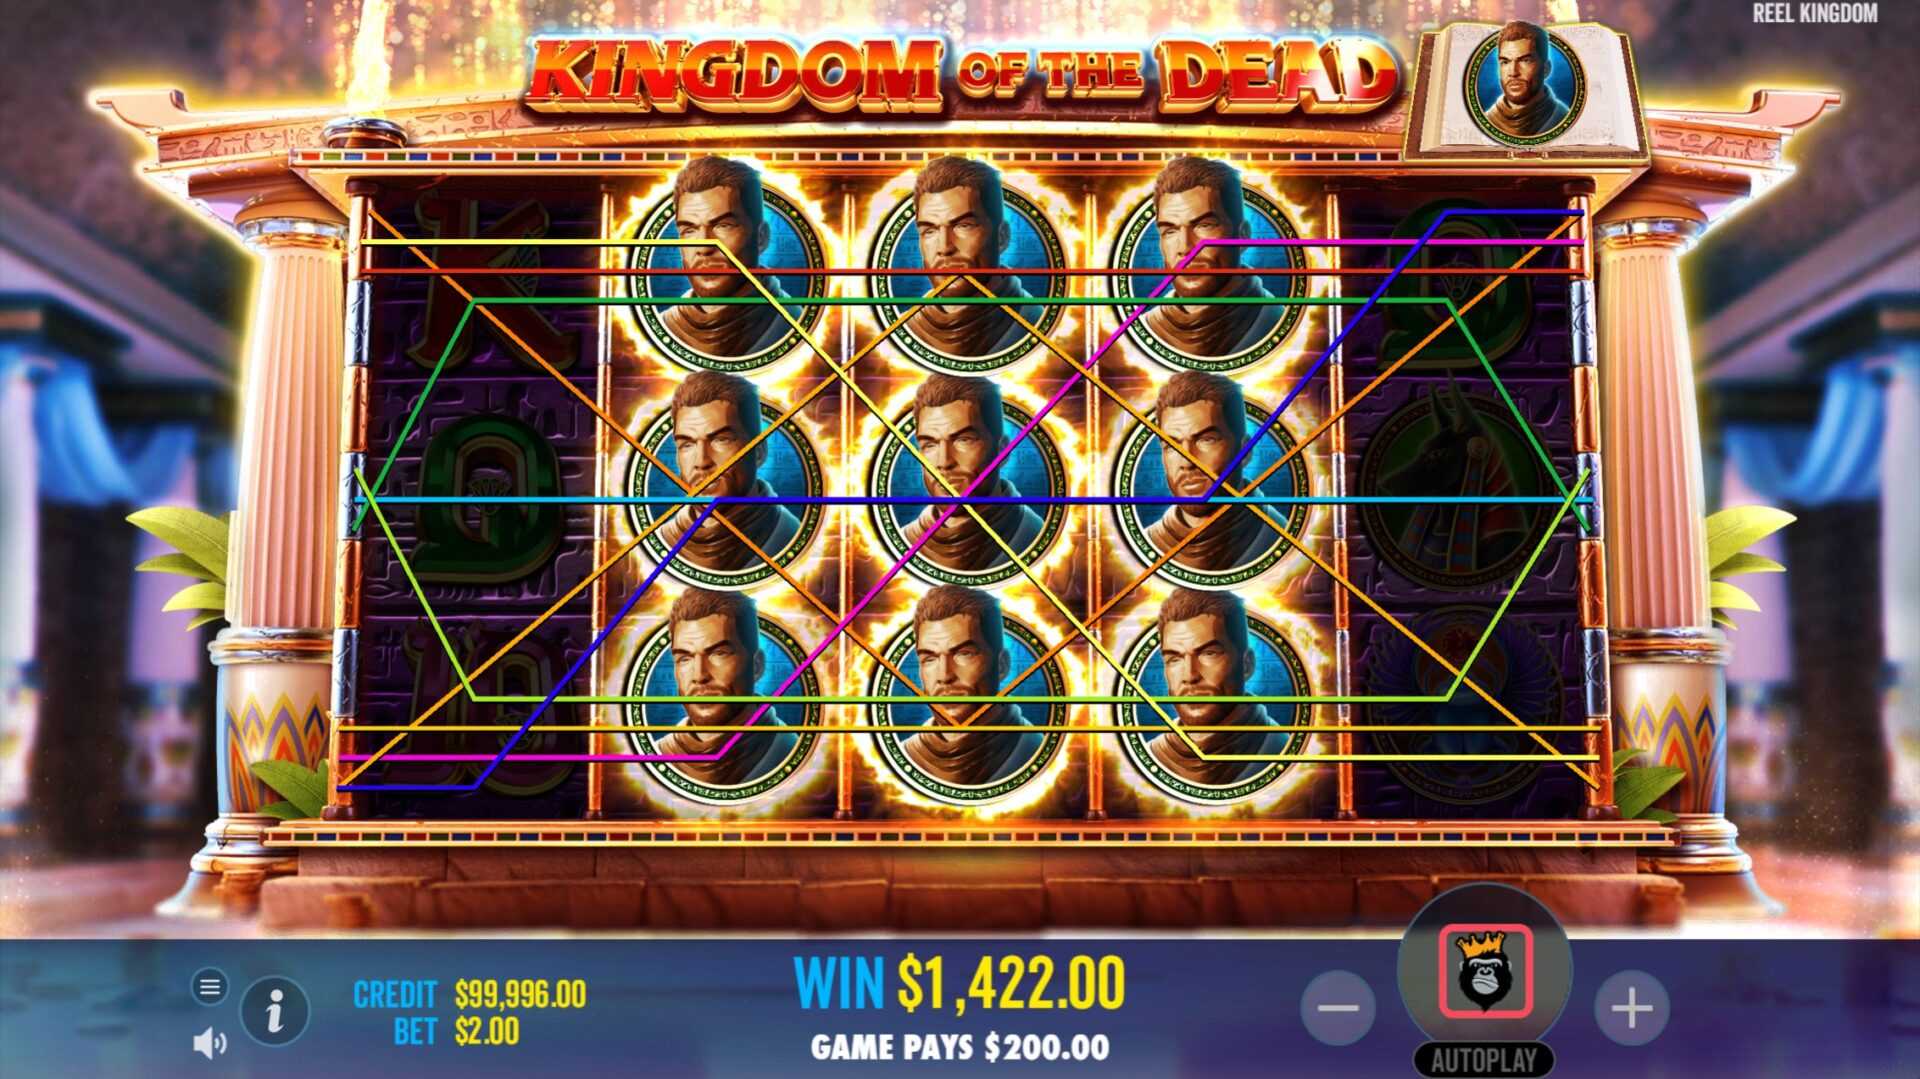 Kingdom of the Dead Slot - Free Spins